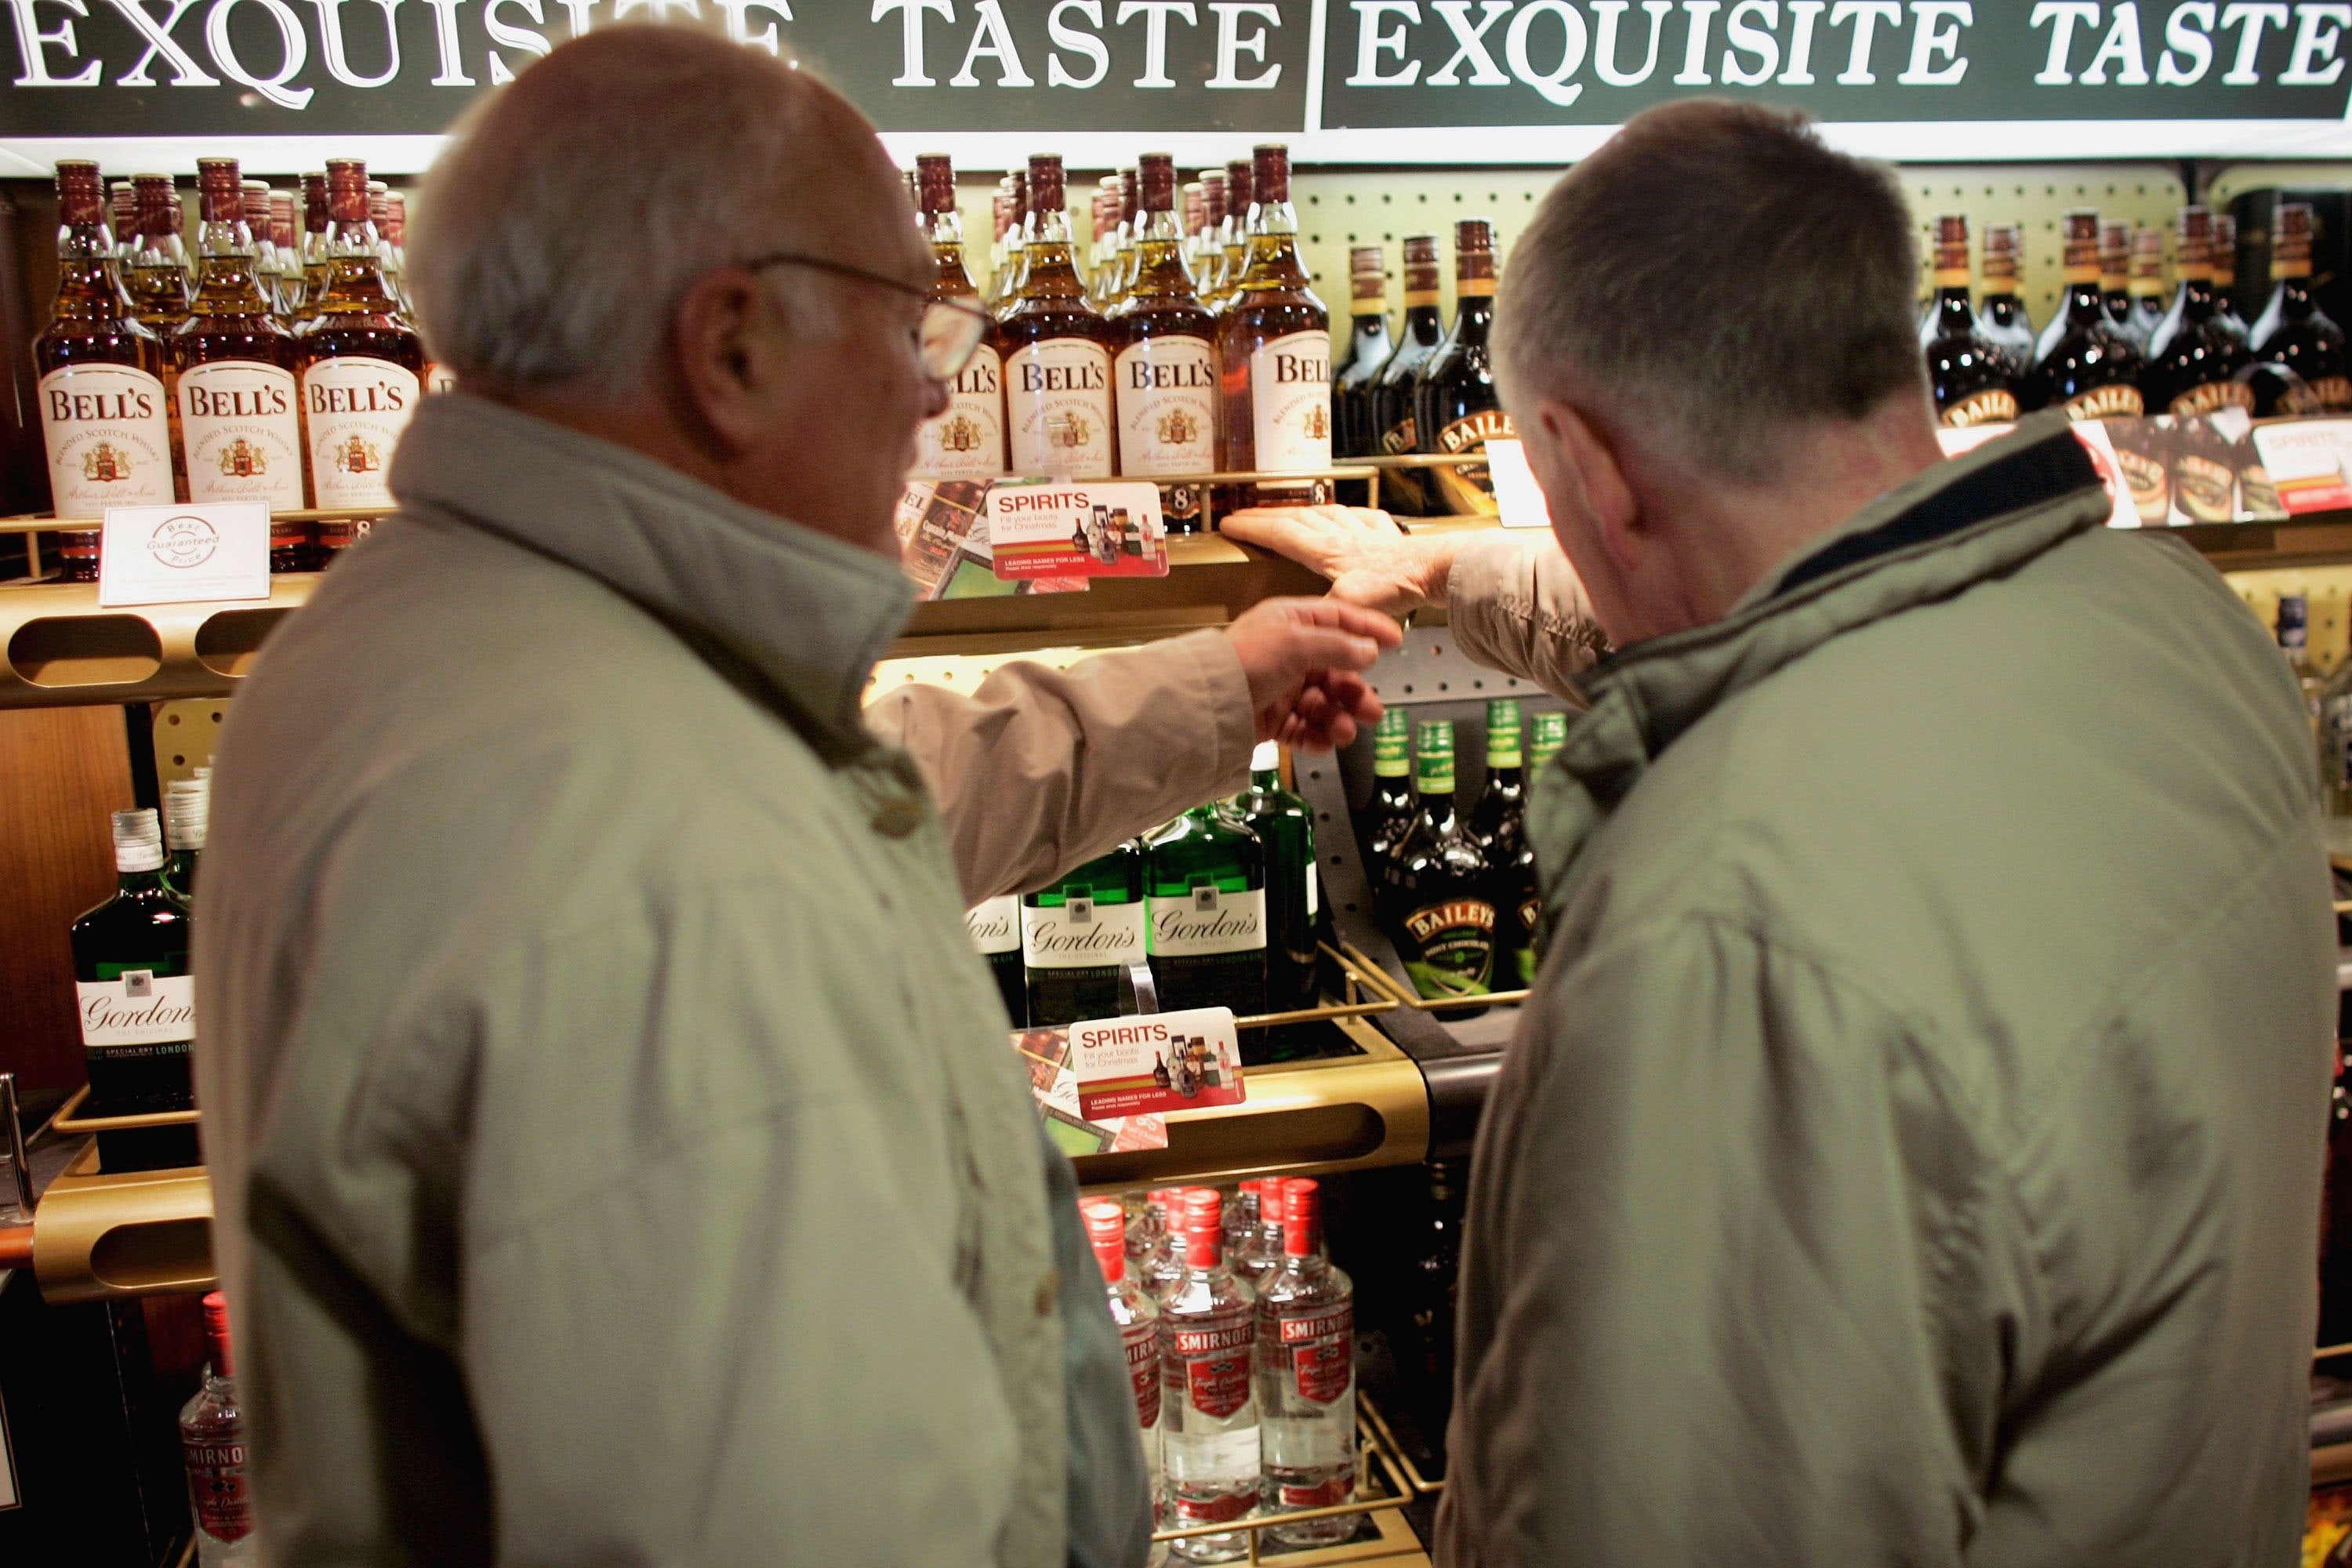 Two passengers discuss which spirits to buy at a duty free store